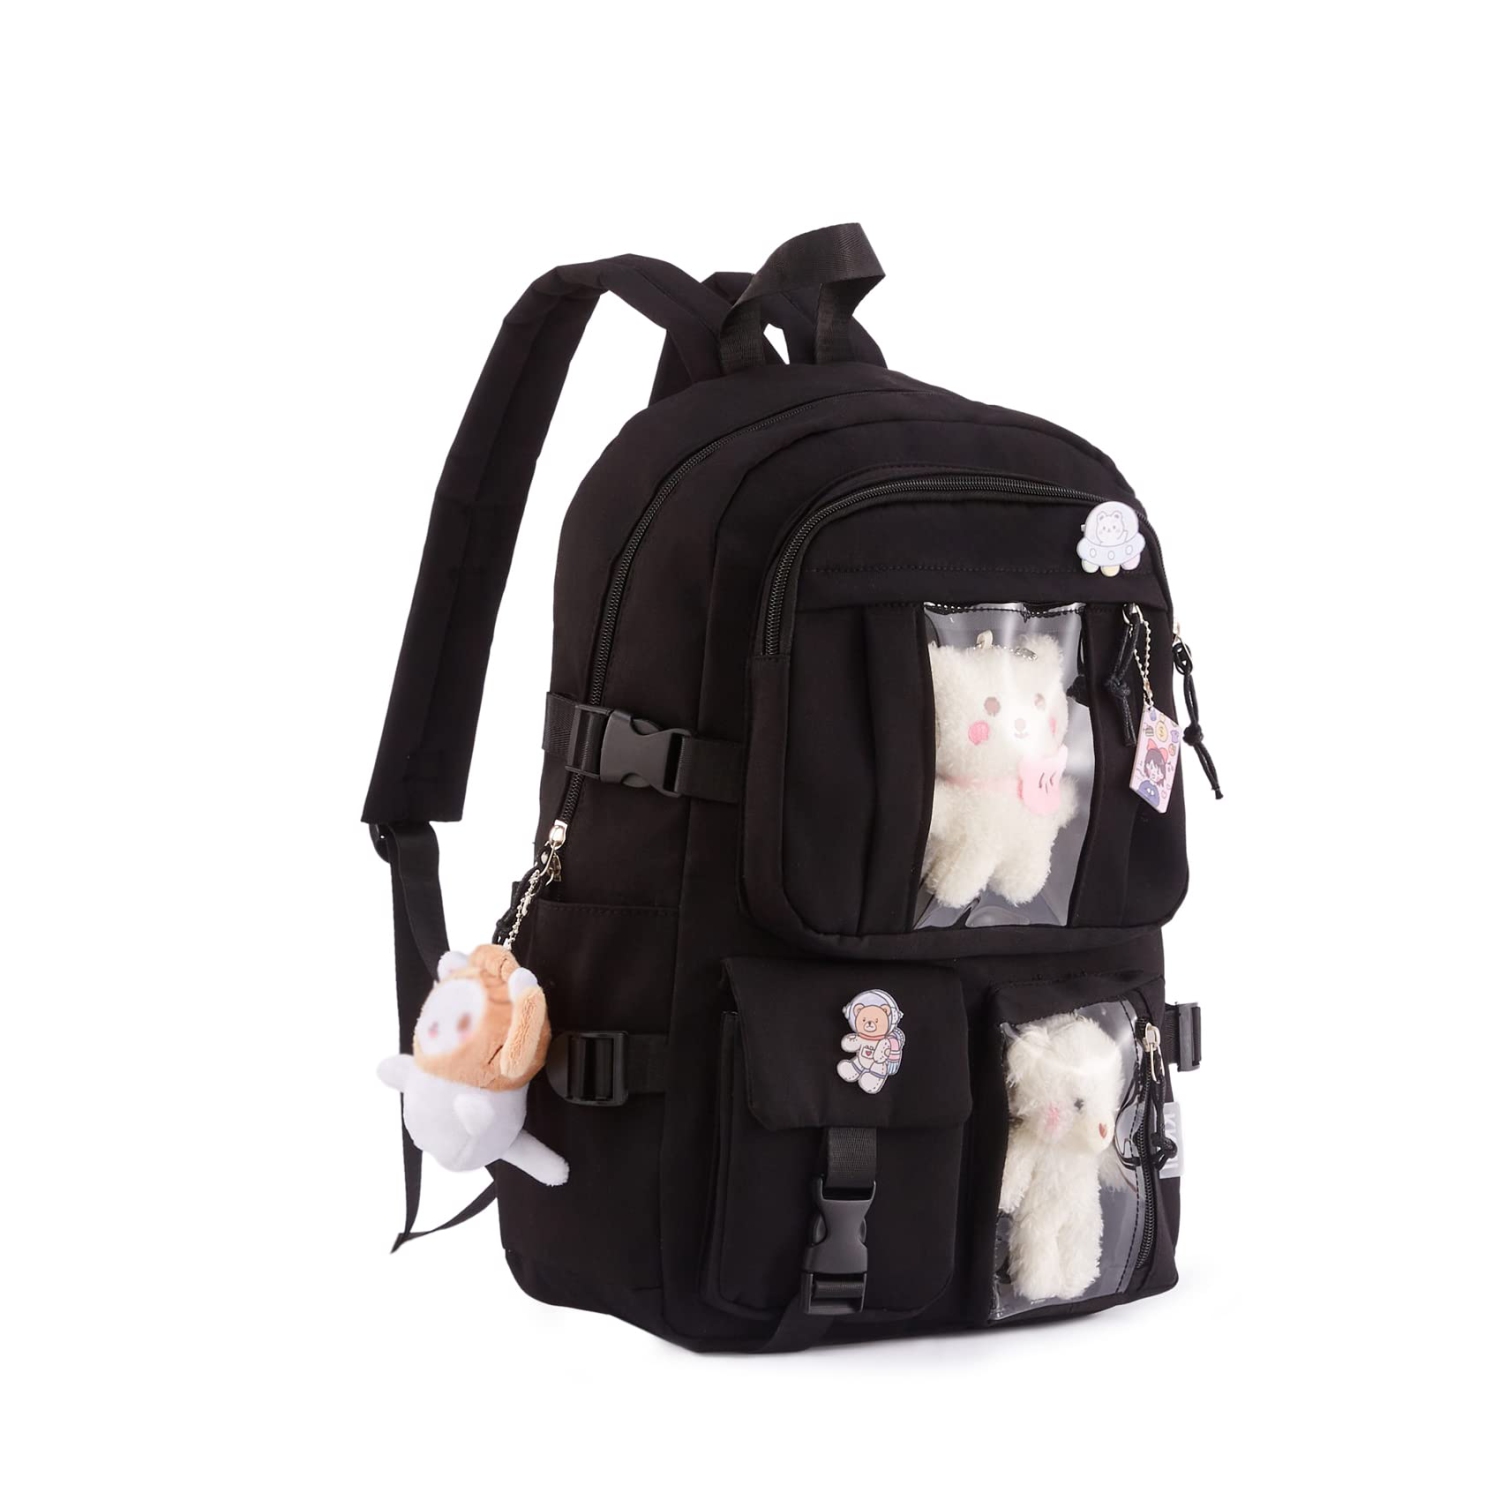 Cute Kawaii Backpack for Women with Pin and Accessories - Aesthetic Kids Backpacks - Socially Acceptable and Positive Mochilas Escolares Para Nias